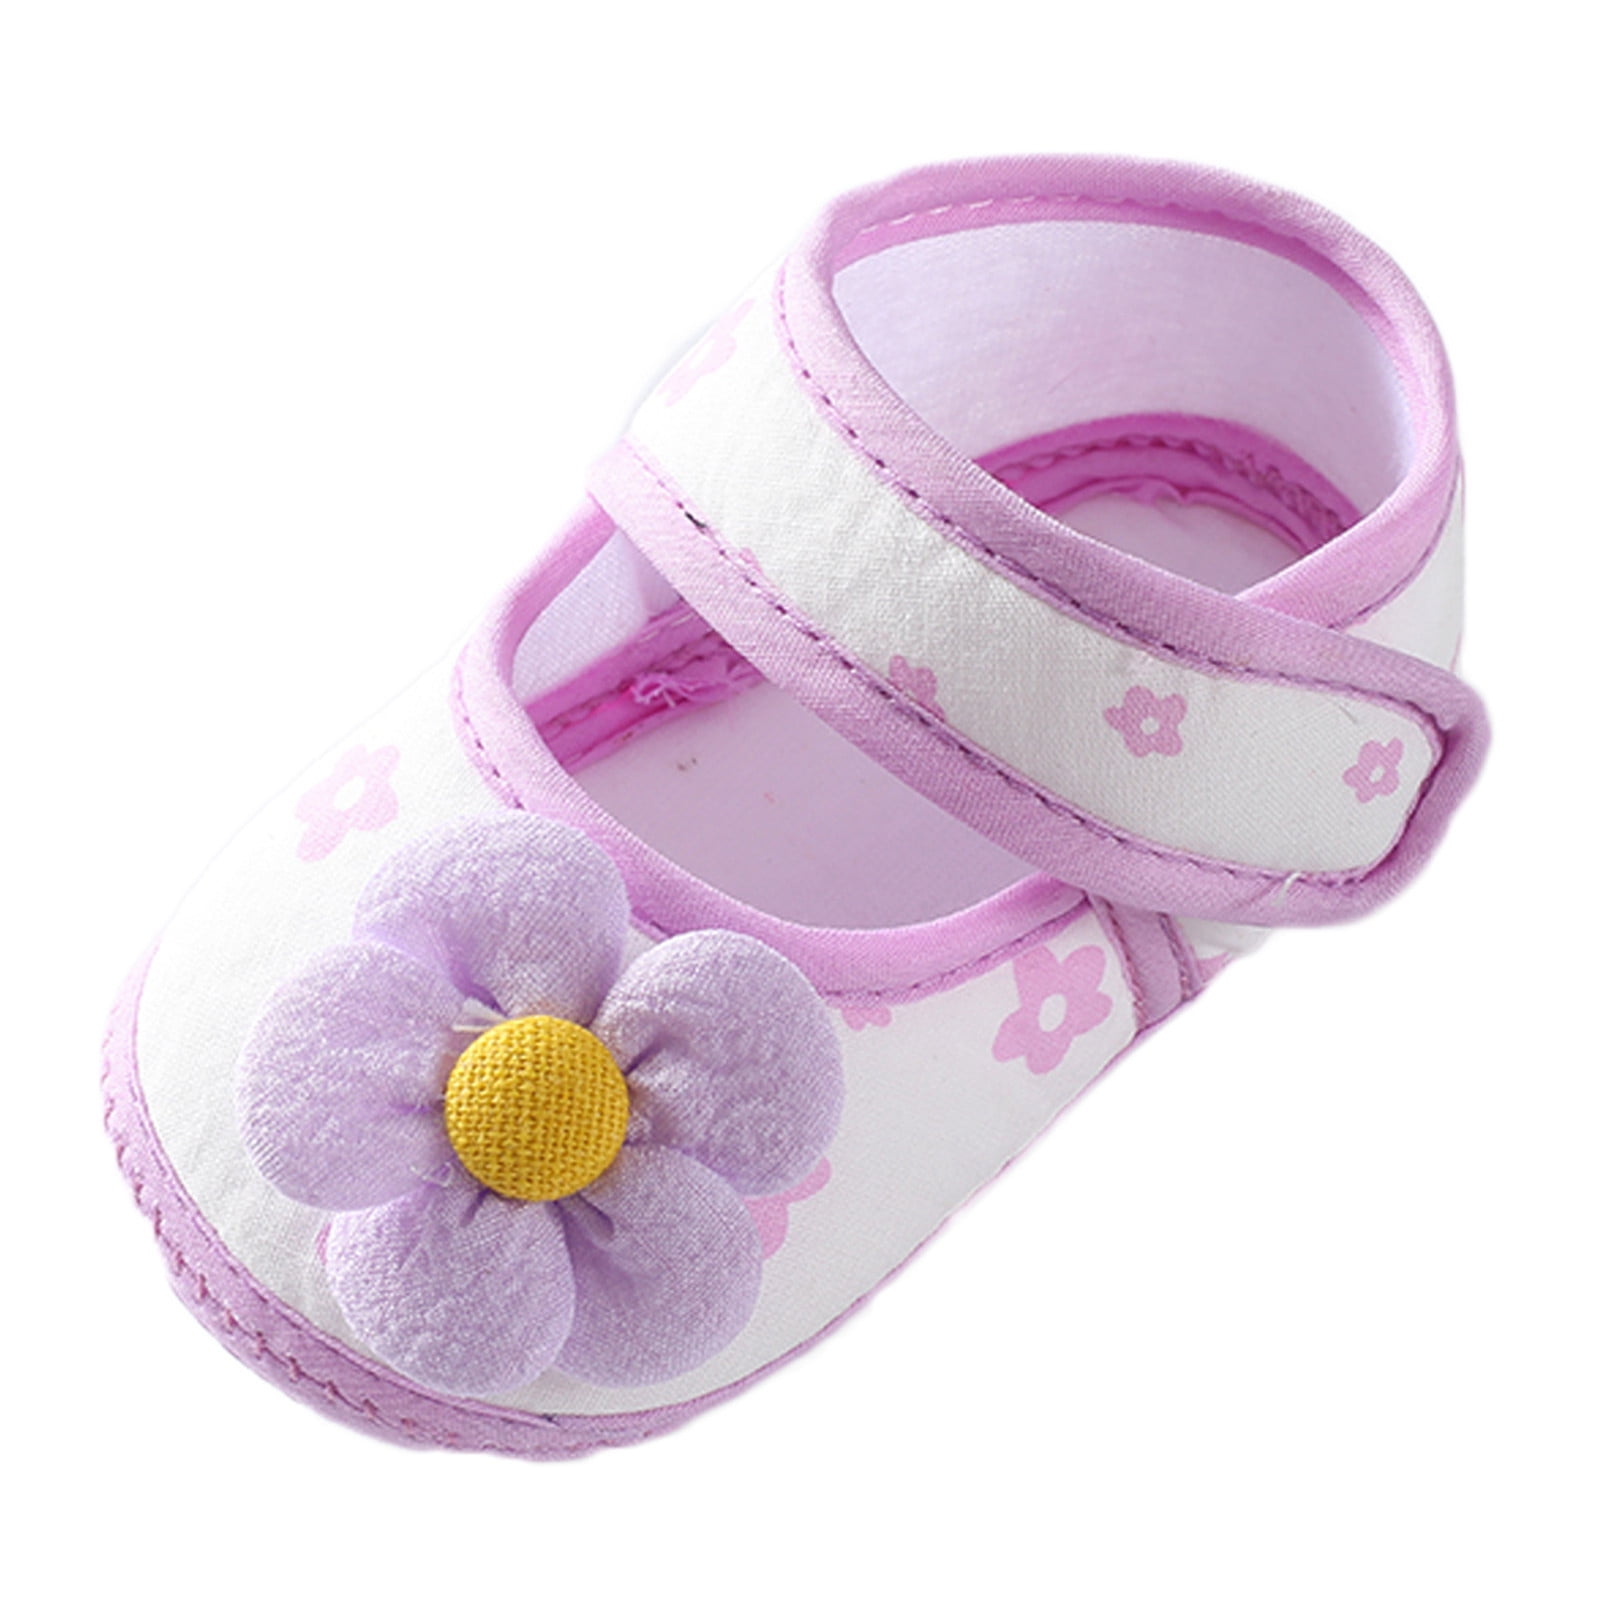 Kcodviy Baby Girls Soft Toddler Shoes Infant Toddler Walkers Shoes Bow ...